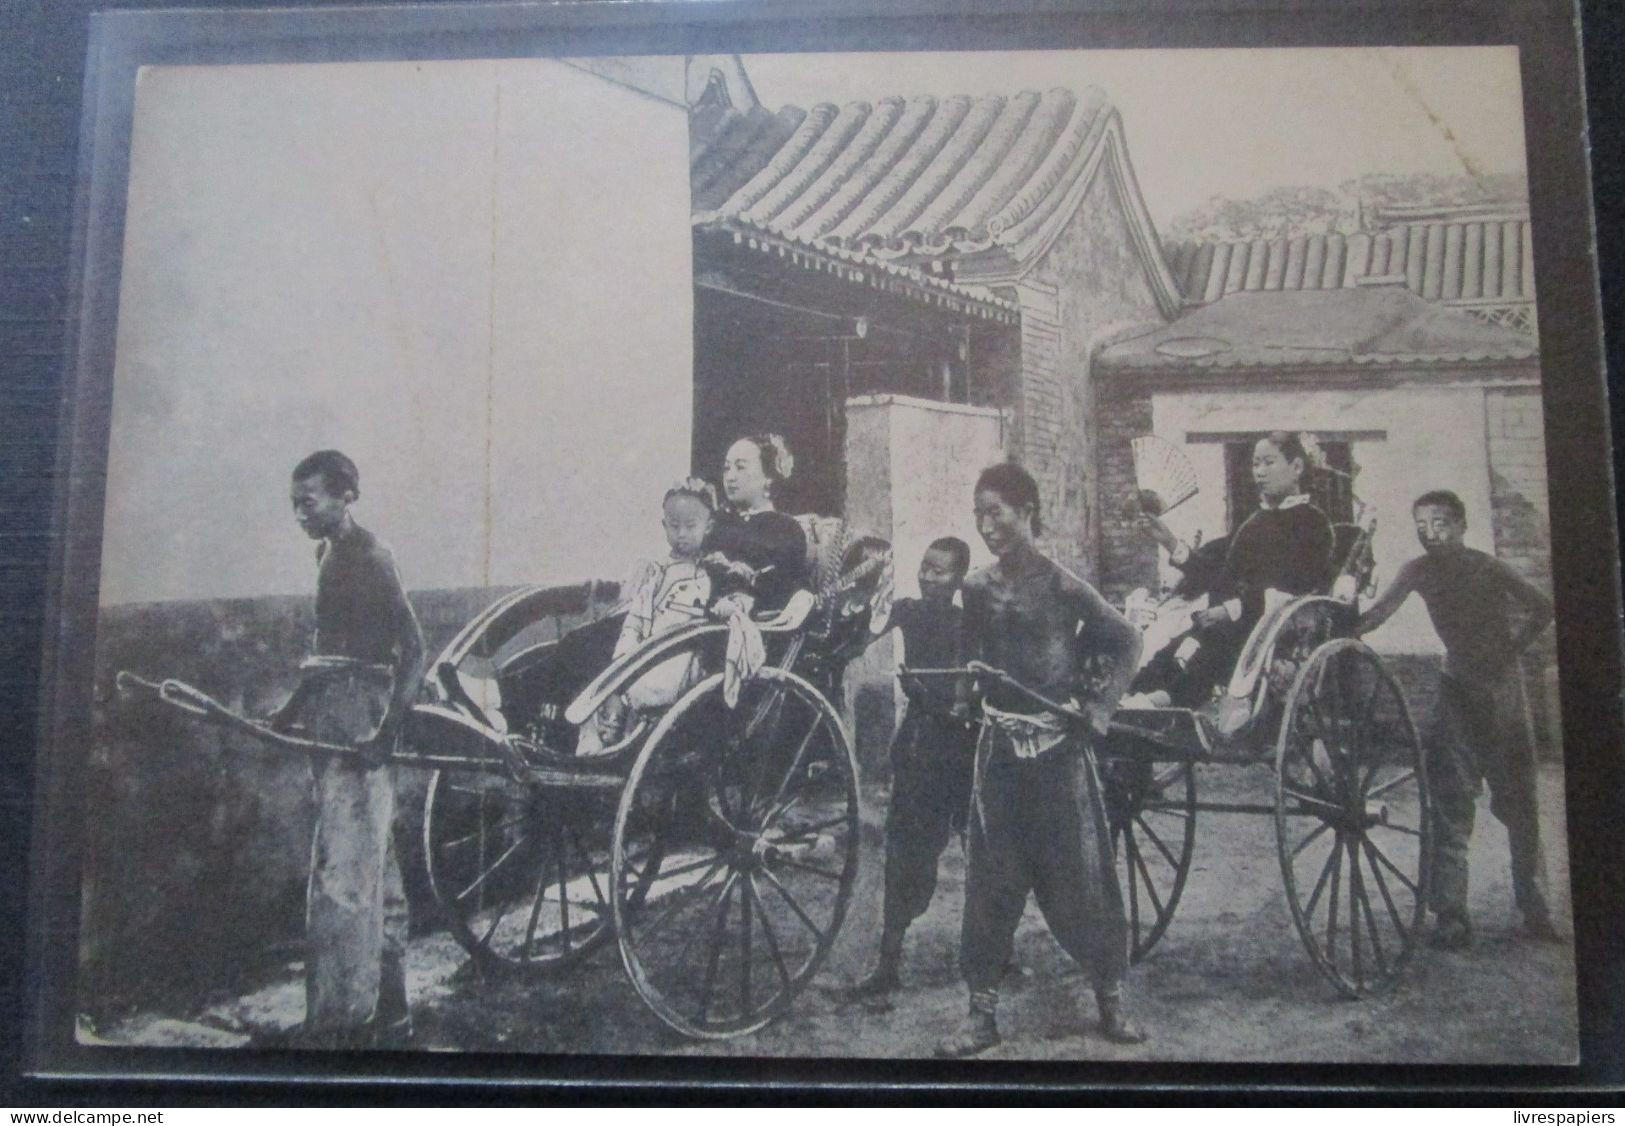 Chine Photo Ancienne Transport Femmes Chinoise - Asien